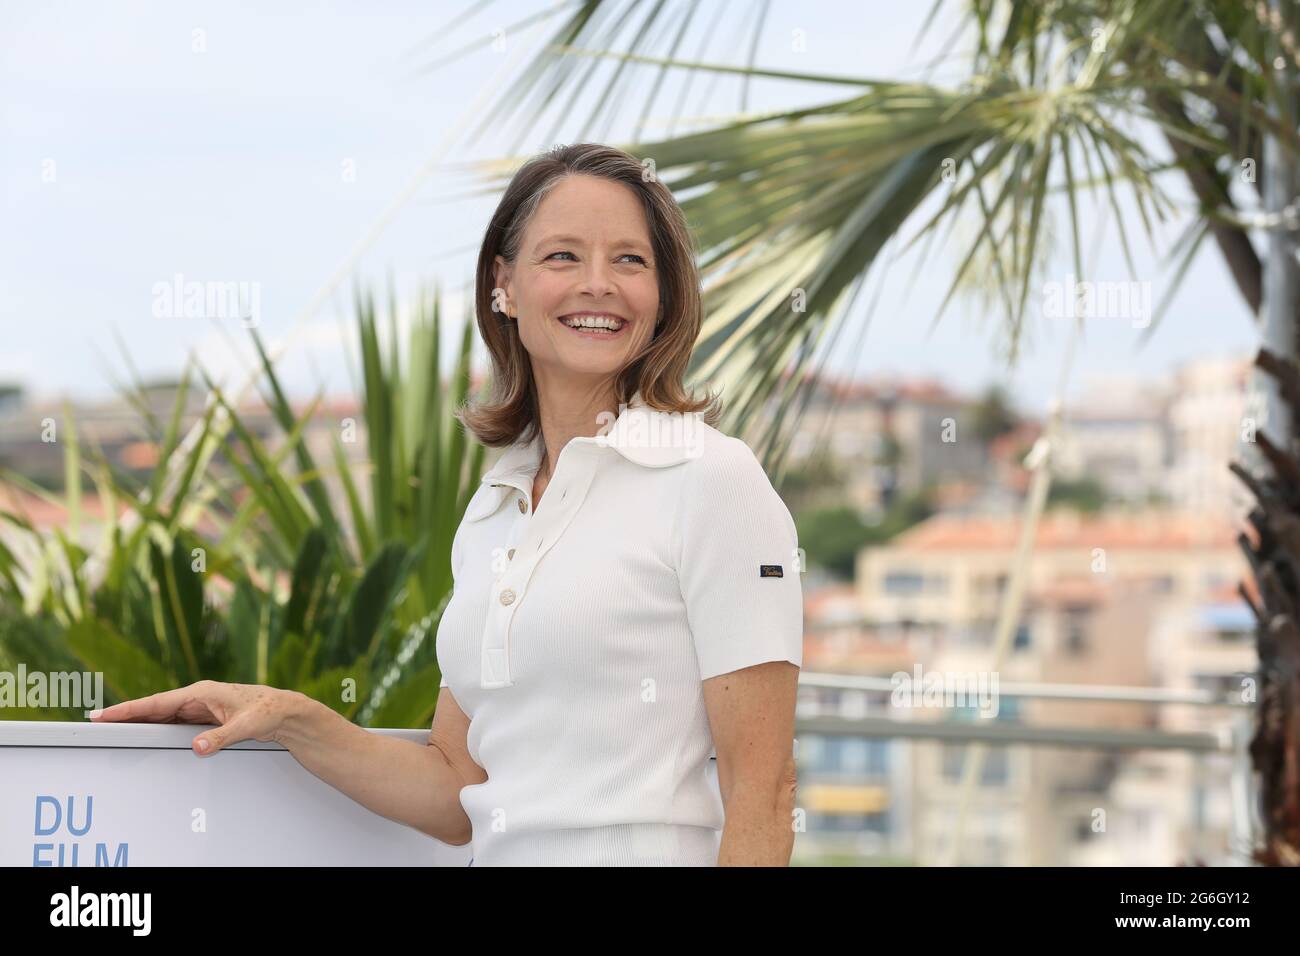 July 6, 2021, Cannes, Provence Alpes Cote d'Azur, France: Guest of honor at the Opening Ceremony, Jodie FOSTER is presented with an honorary Palme d'Or as part of the 74th annual Cannes Film Festival on July 6th 2021 in Cannes, France (Credit Image: © Mickael Chavet via ZUMA Wire) Stock Photo